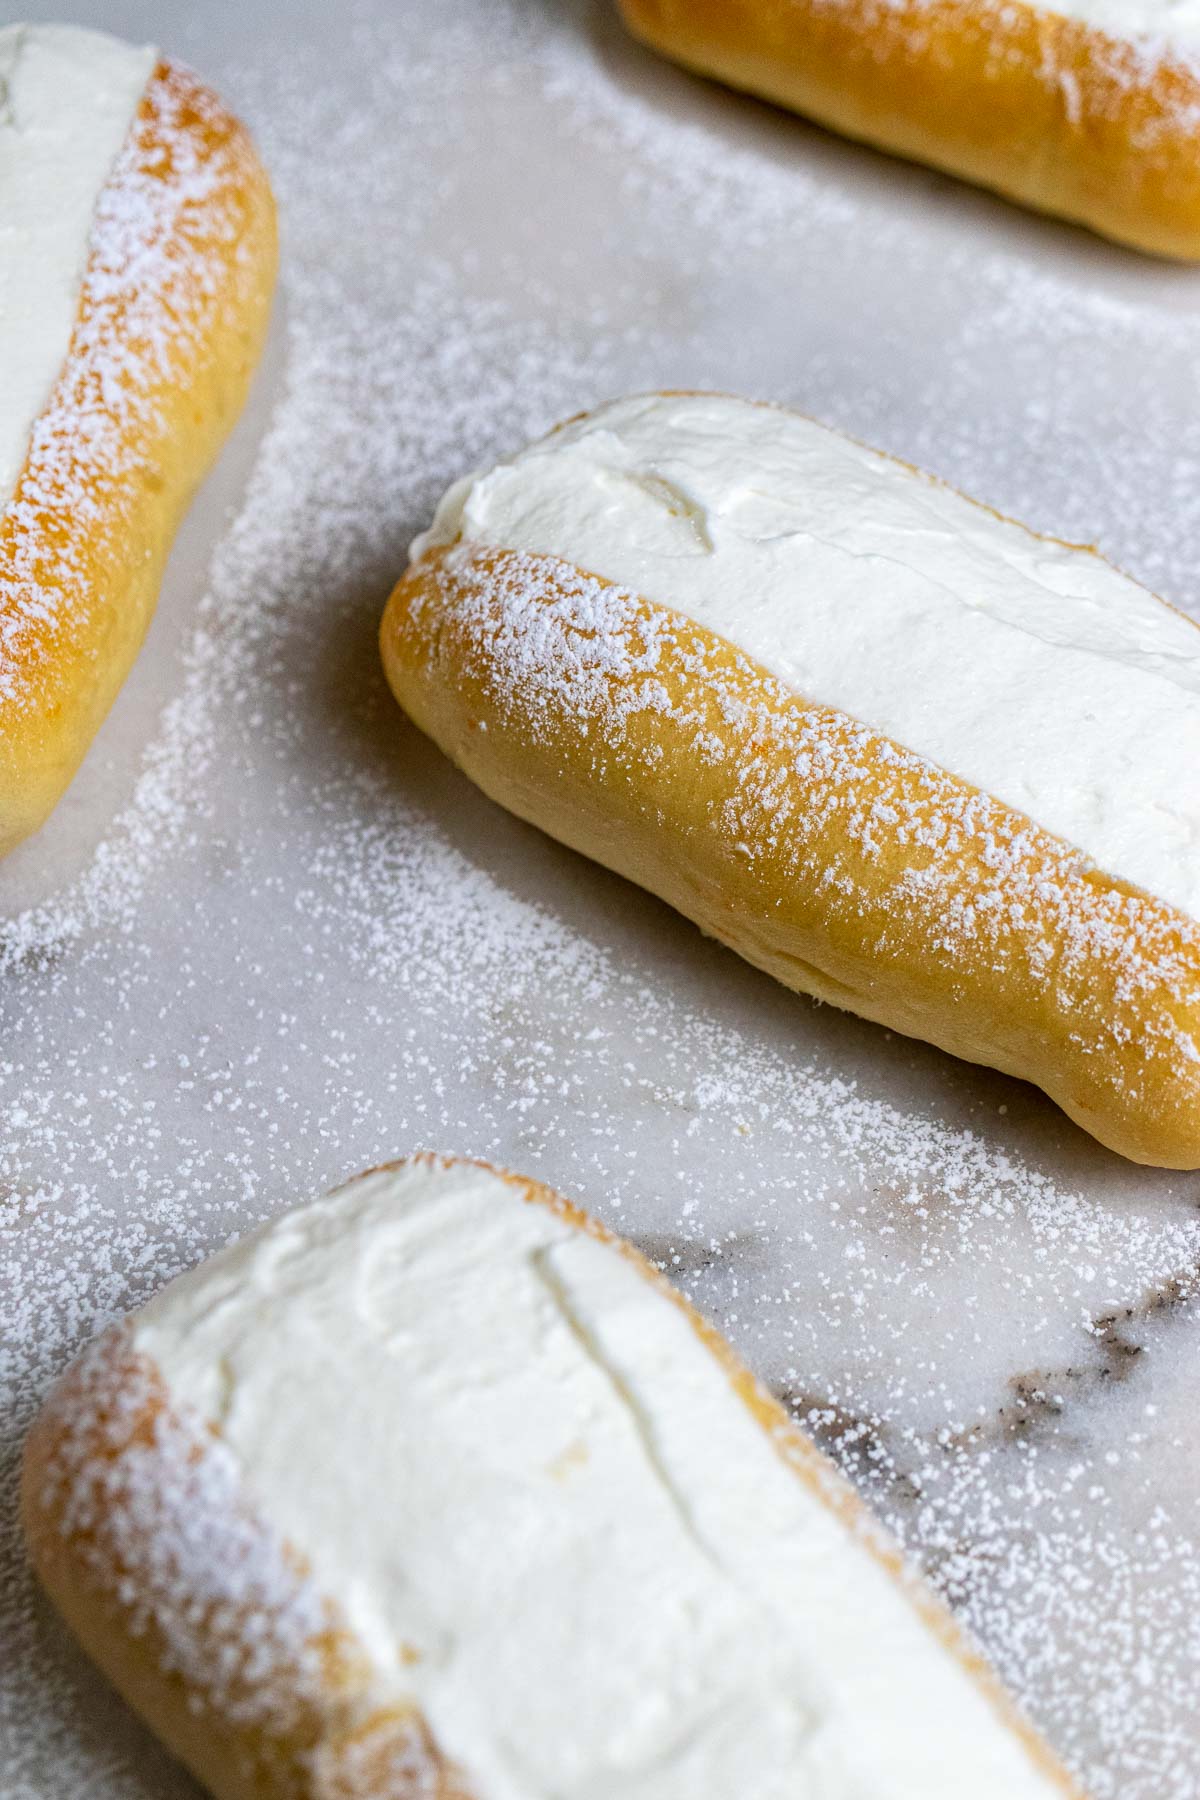 Roman maritozzi buns filled with whipped cream and dusted with powdered sugar on a marble counter.